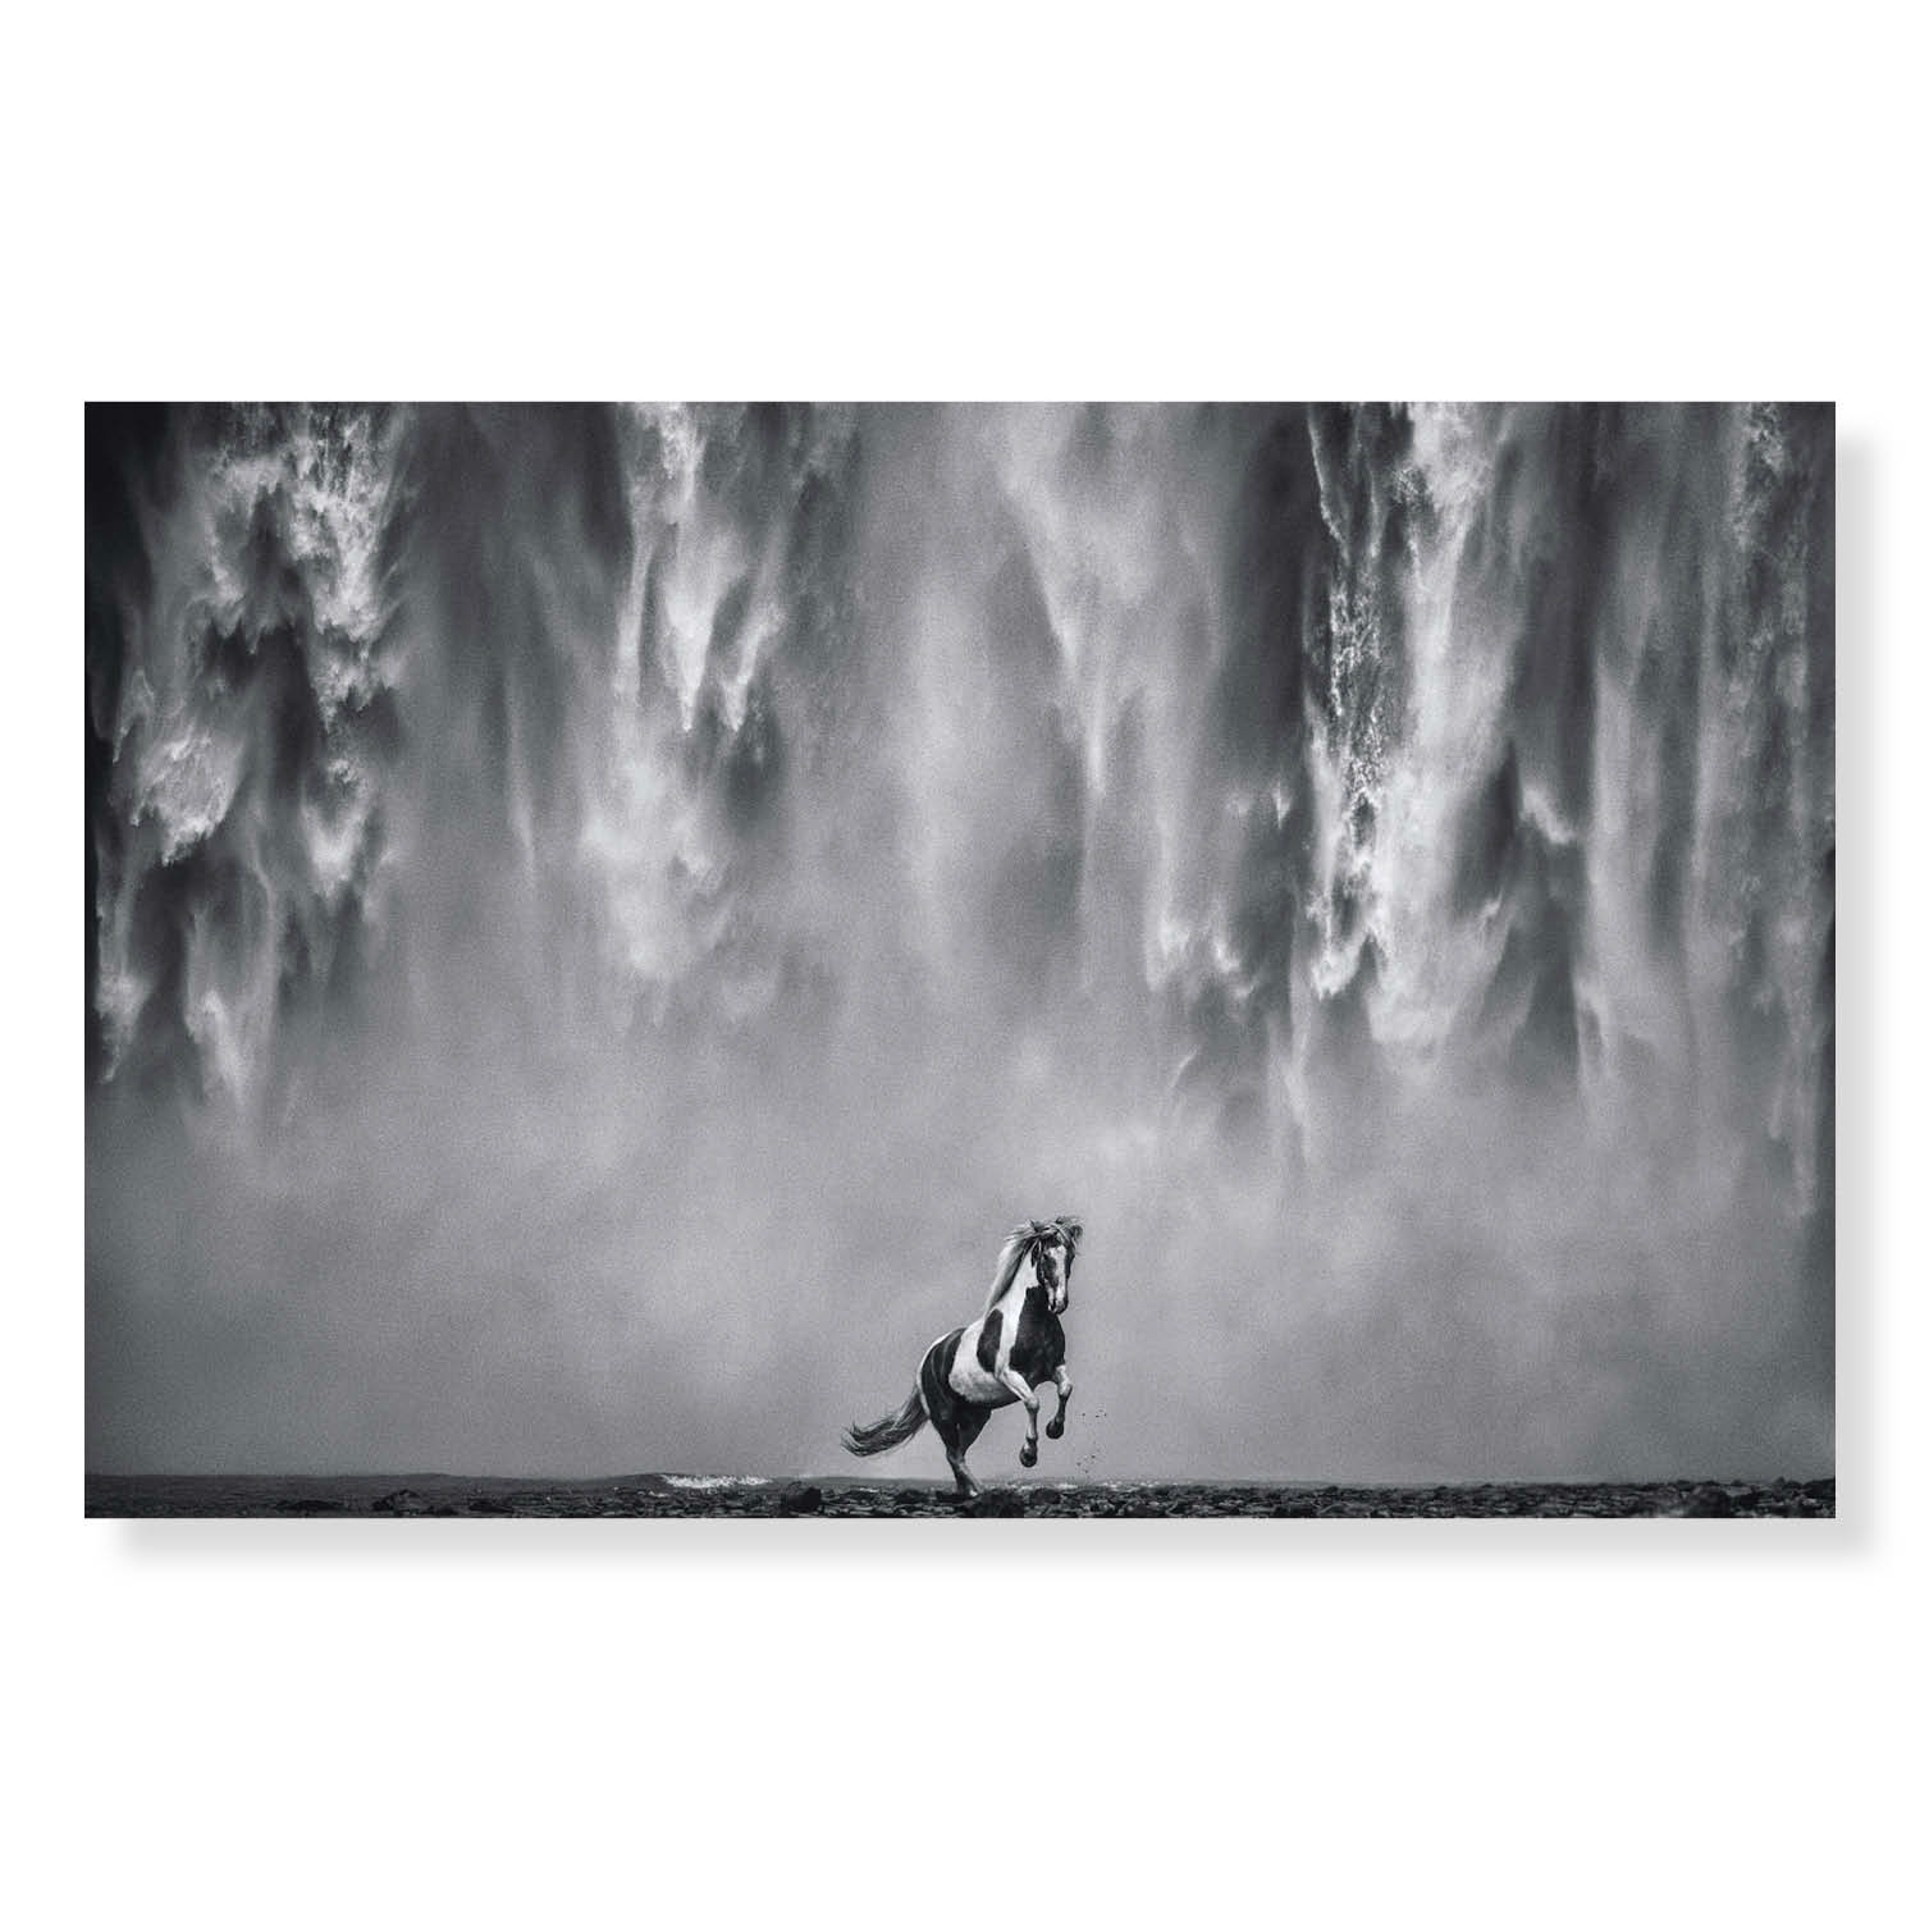 Legends of the Fall by David Yarrow